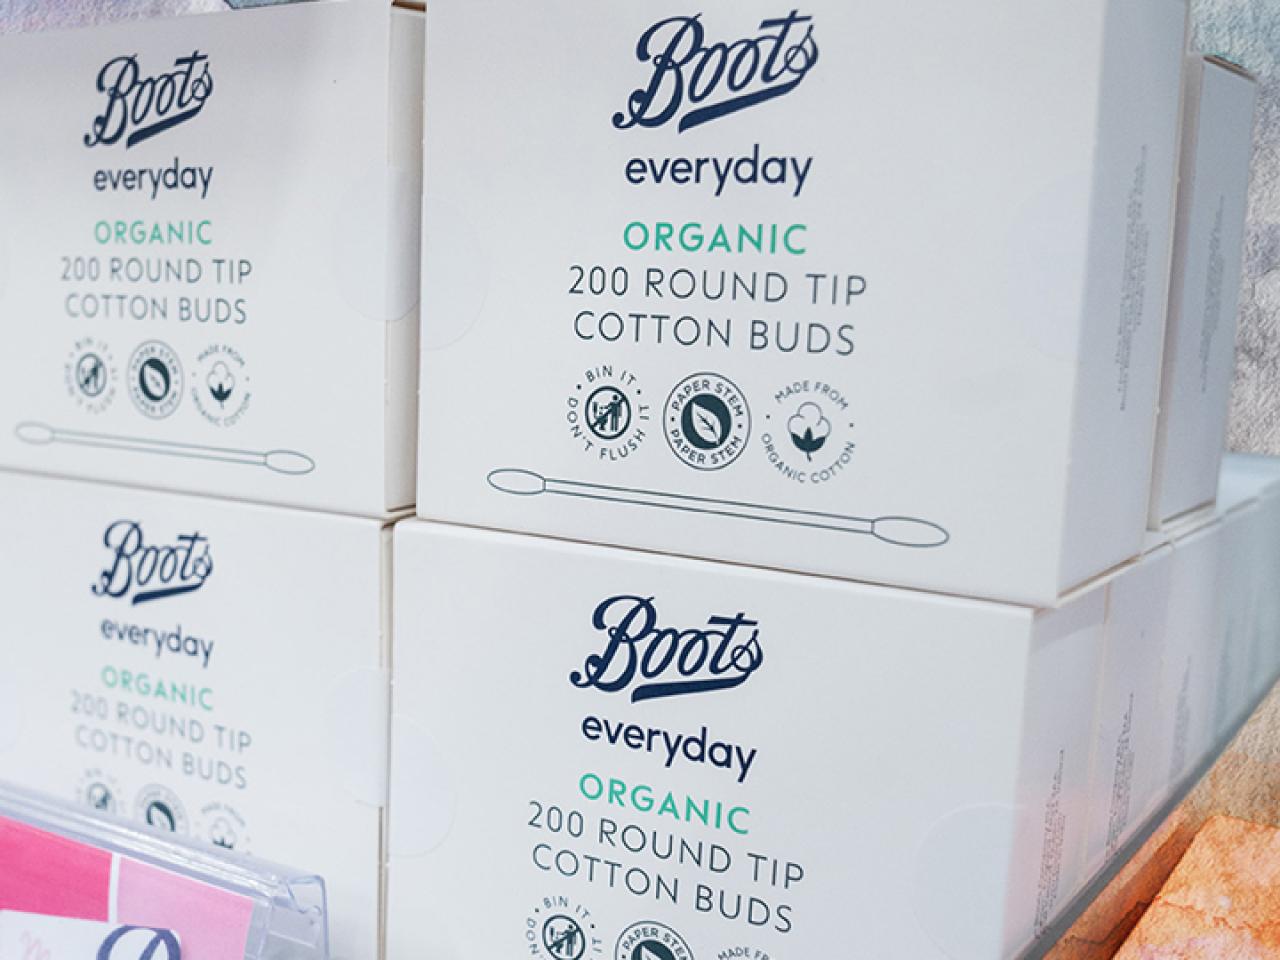 Stacked boxes "Boots everyday Organic 200 round tip cotton buds" on the side.